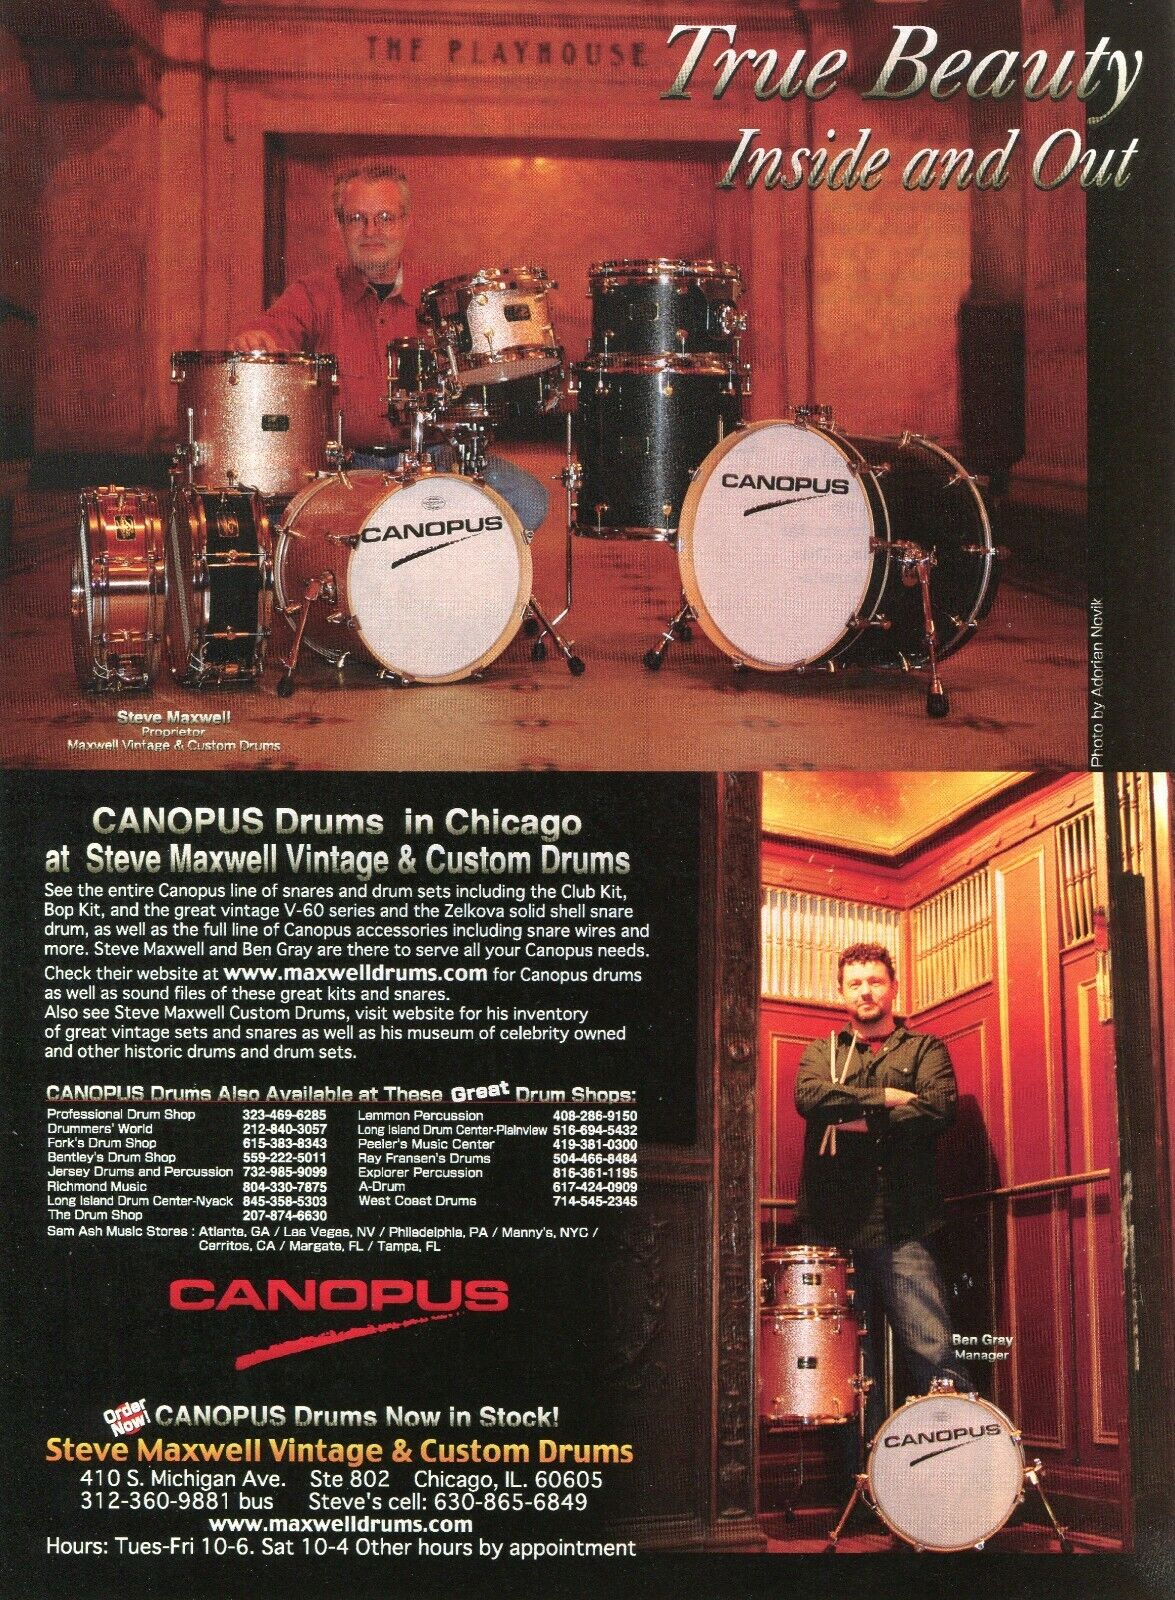 2007 Print Ad of Canopus Drum Kits & Snares at Steve Maxwell Drum Shop Chicago